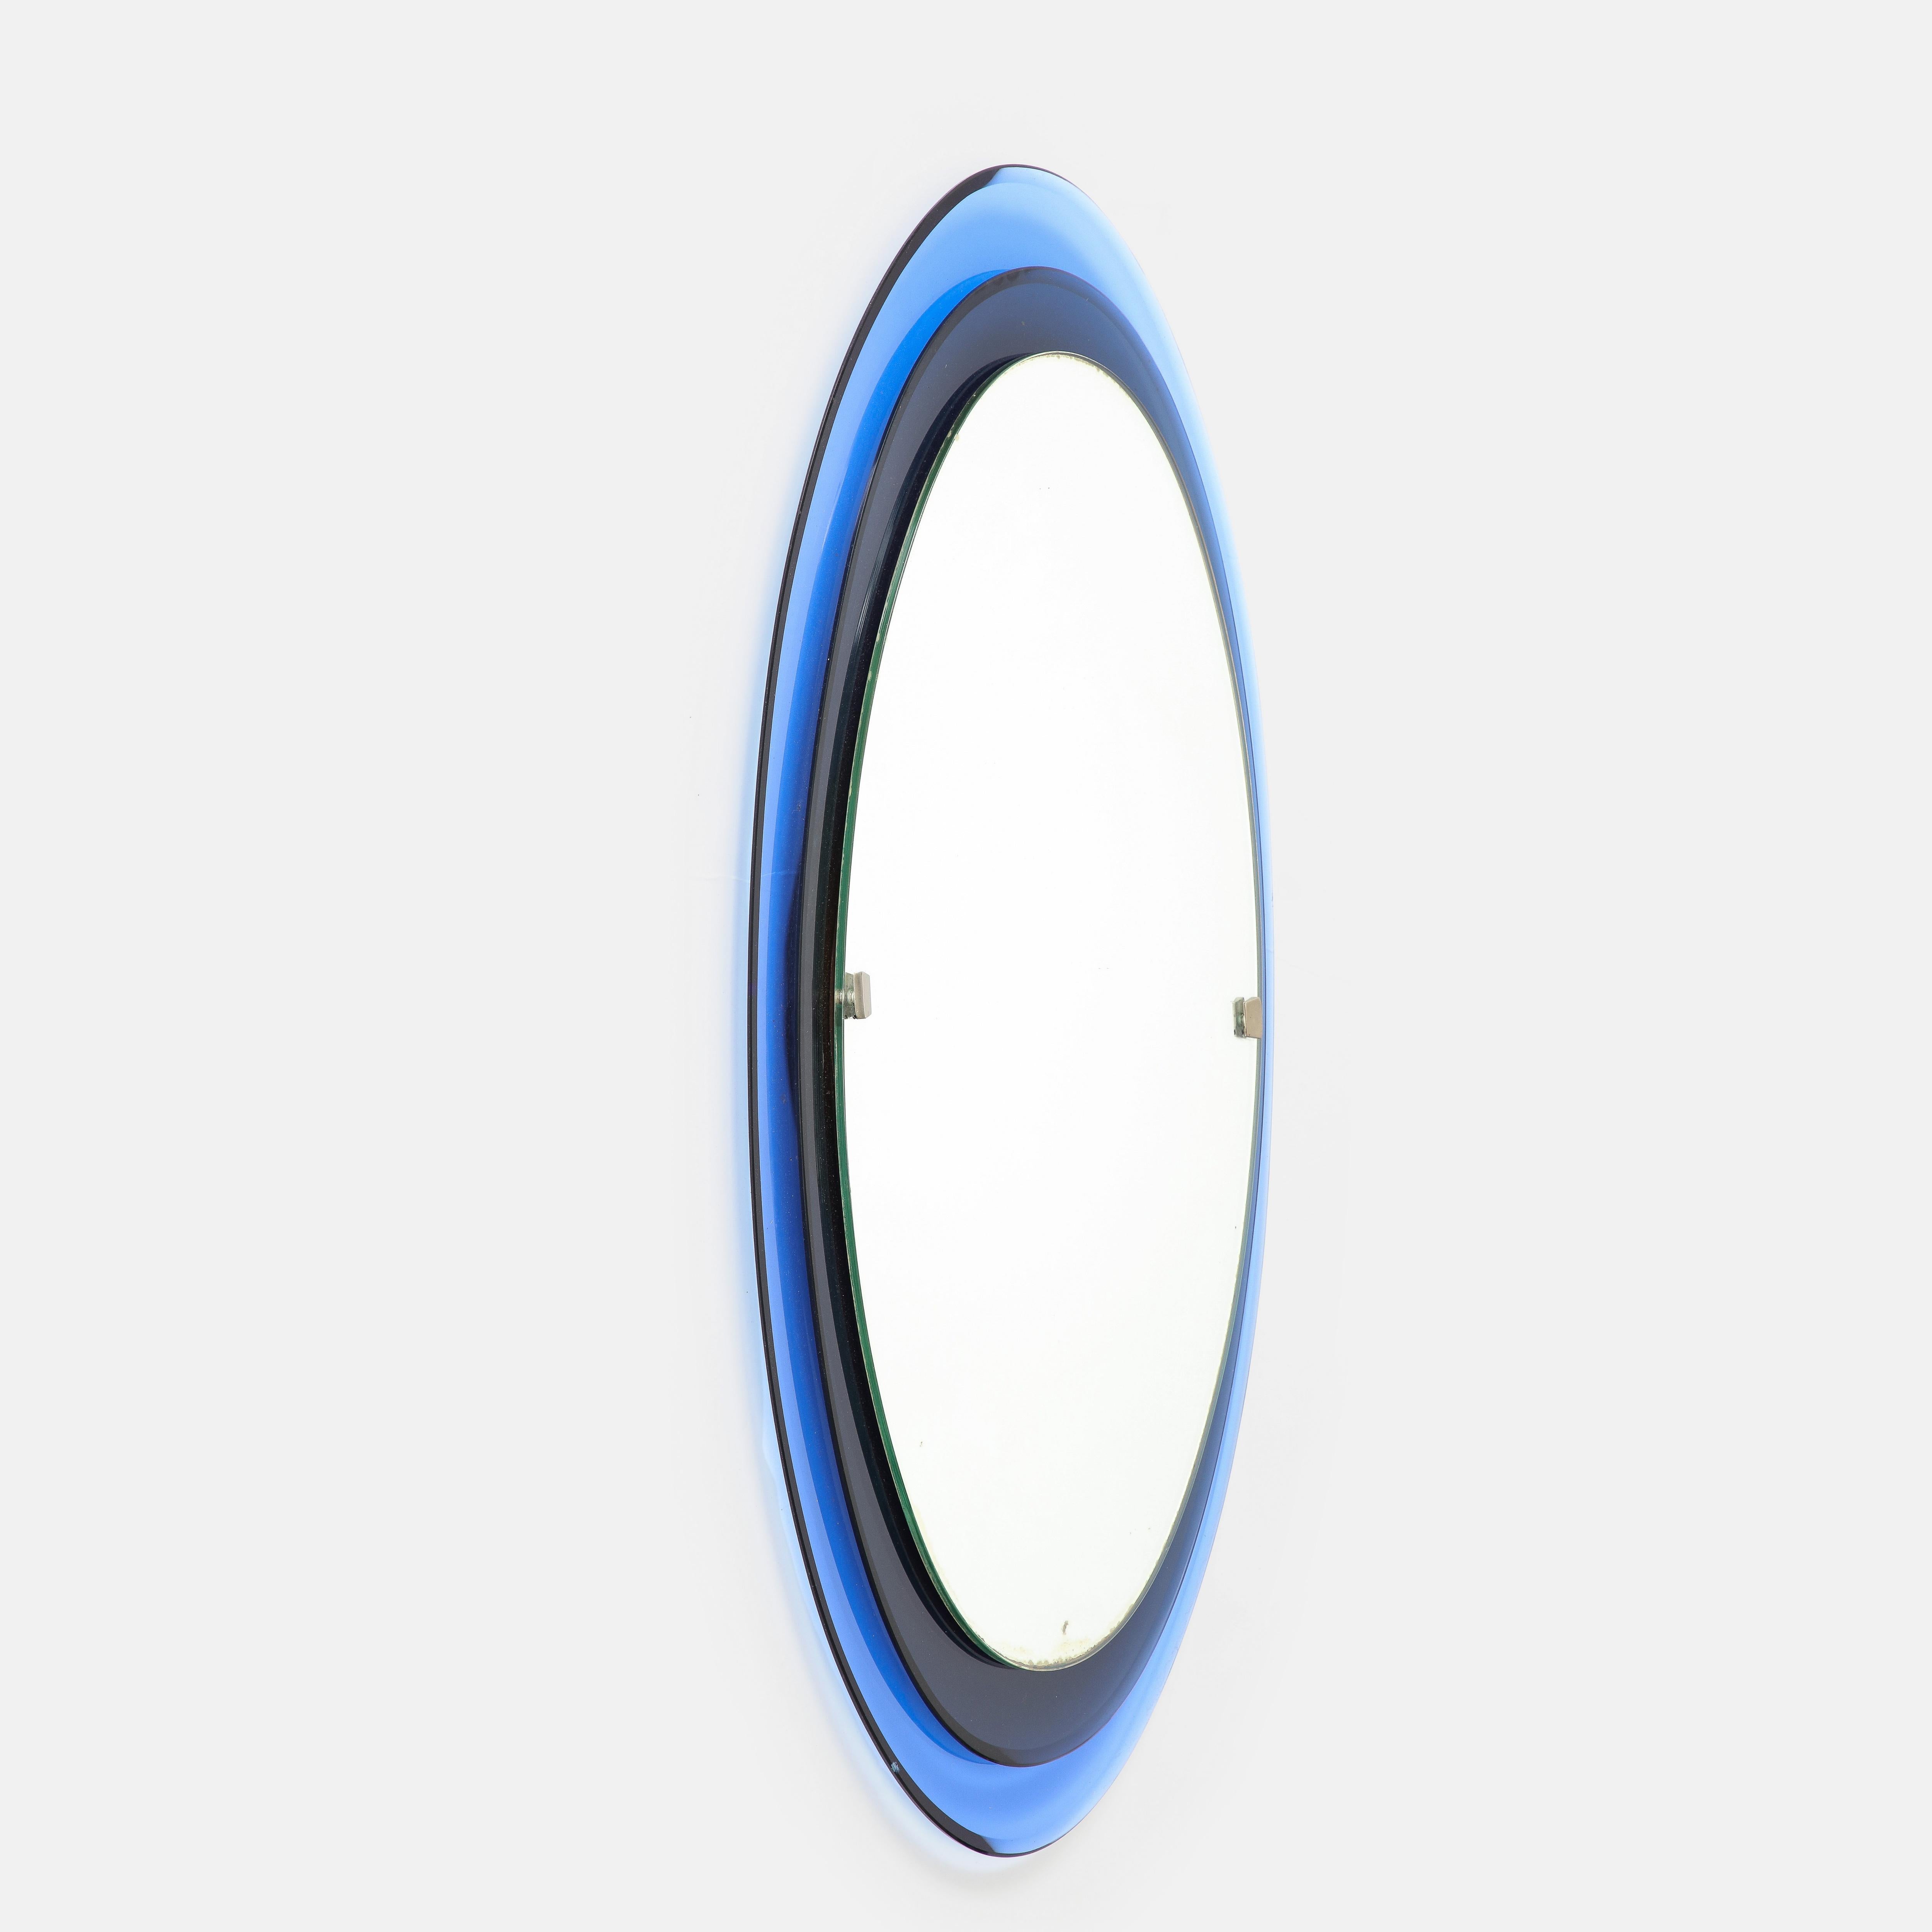 Max Ingrand Fontana Arte rare oval crystal mirror model 2046 consisting of two tiers of colored, curved and beveled glass framing mirrored glass with nickel-plated metal mounts, Italy, 1960s. Manufacturer’s label Fontanit on wood backing of